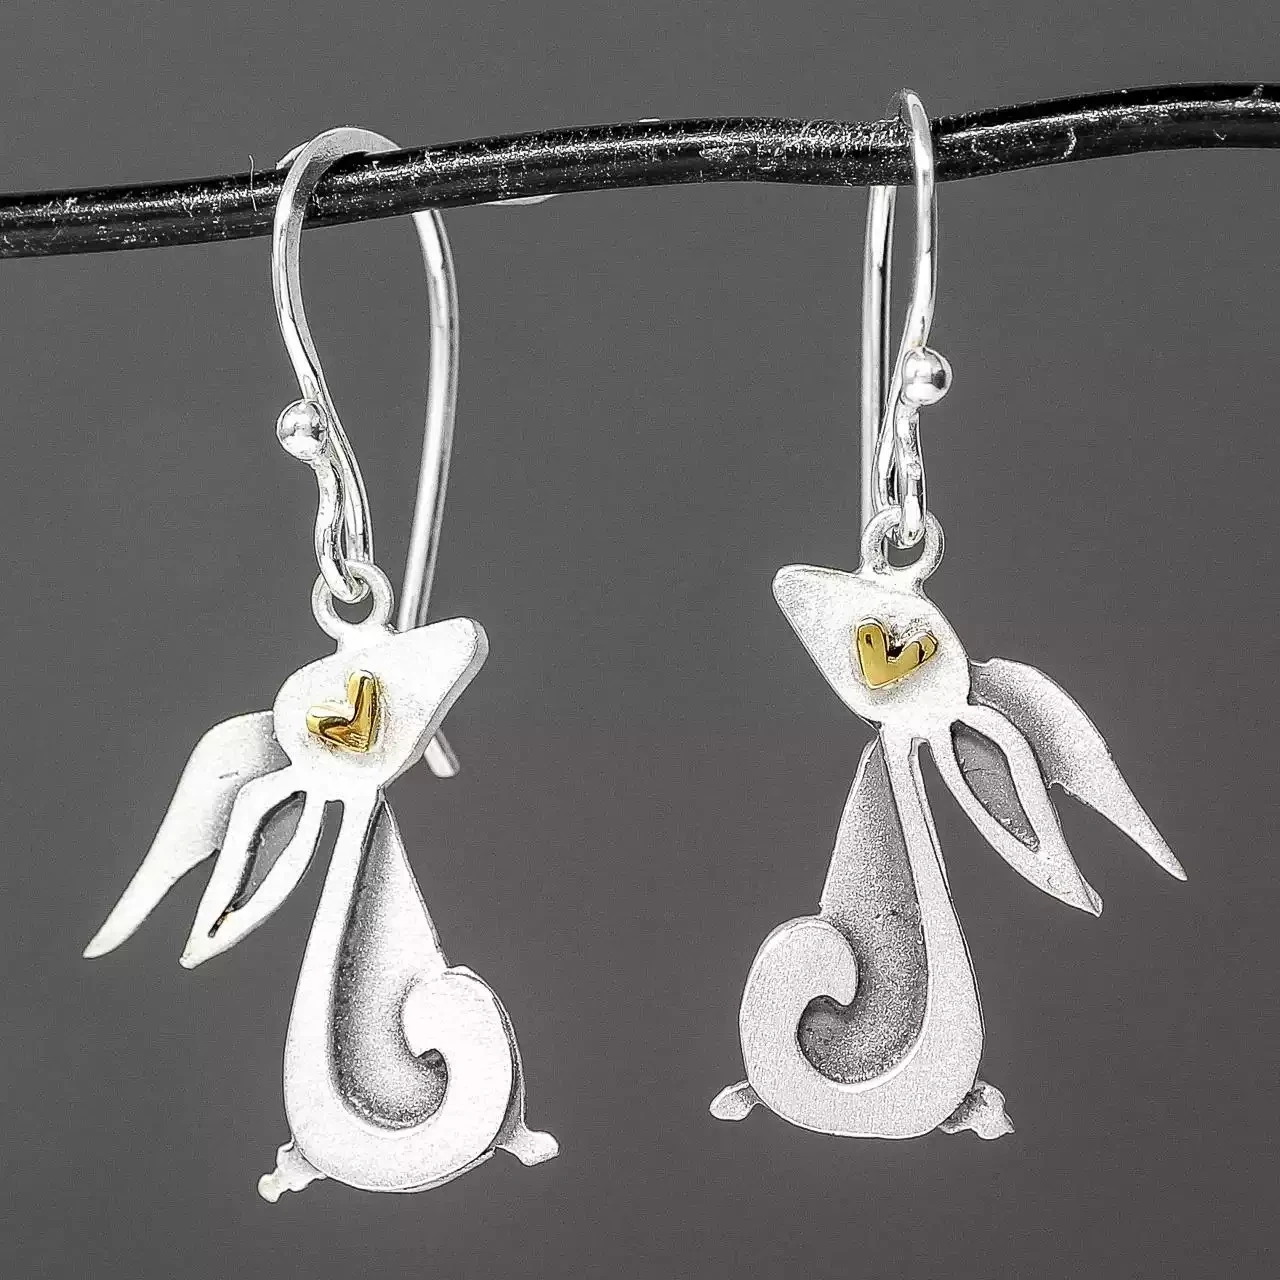 Hare Silver and Gold Drop Earrings by Linda Macdonald